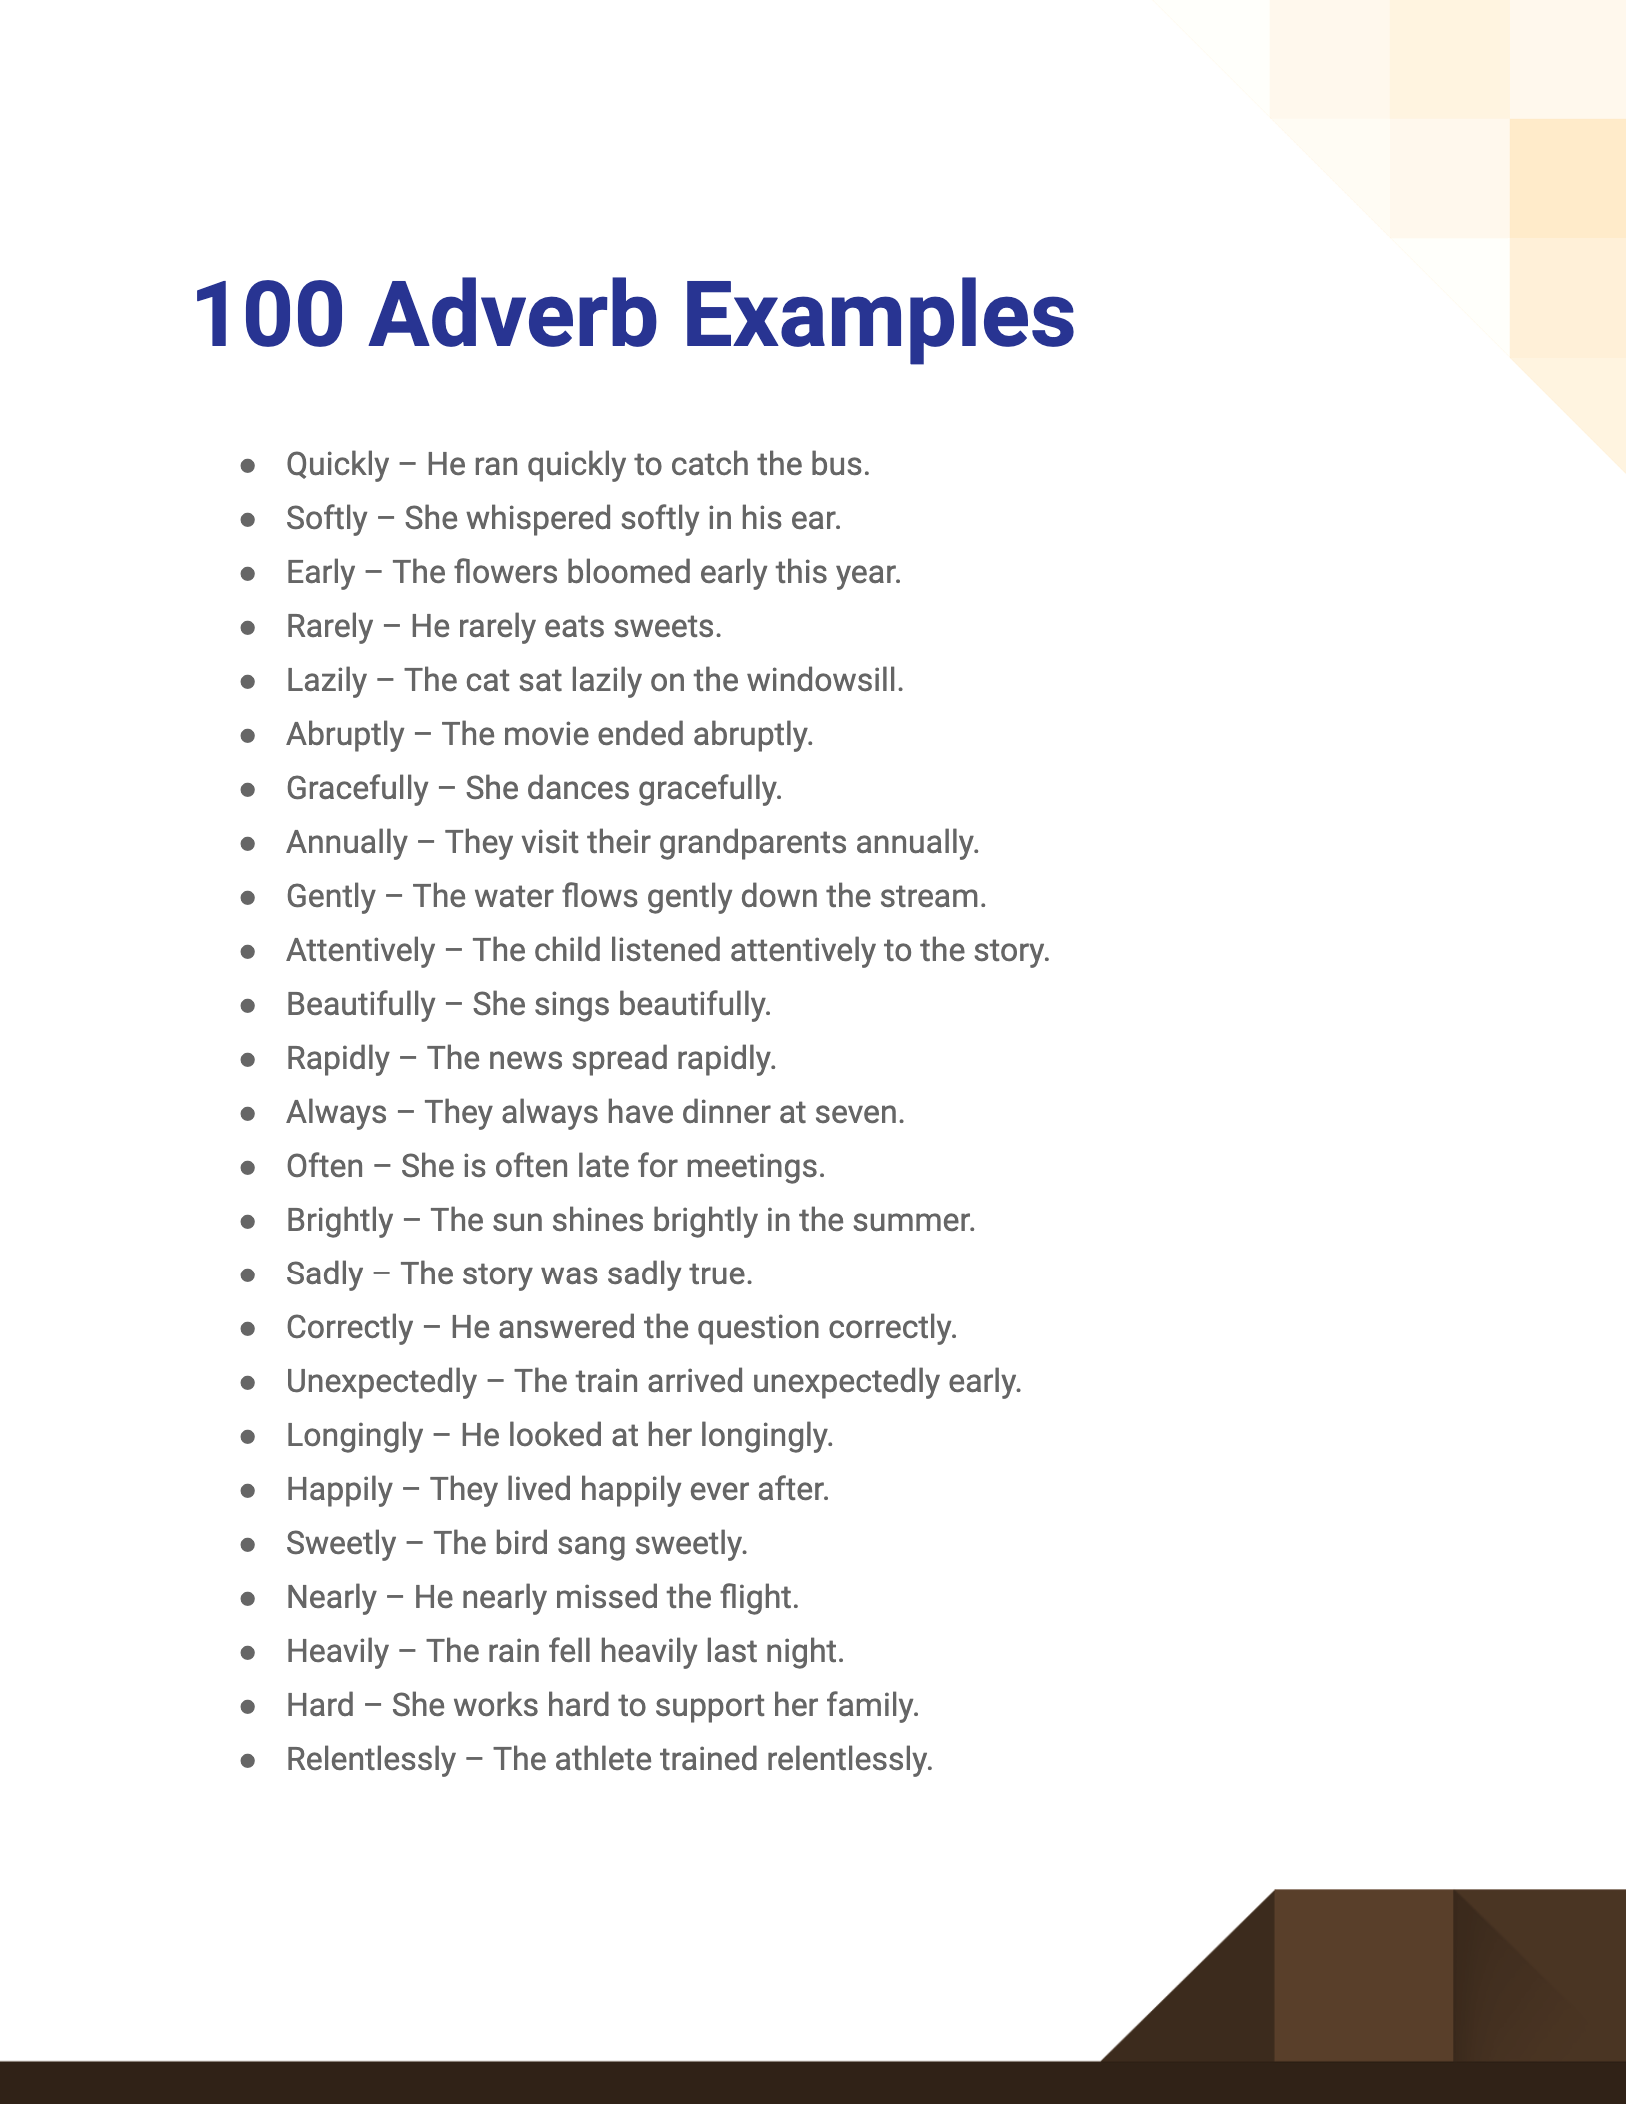 adverb examples1